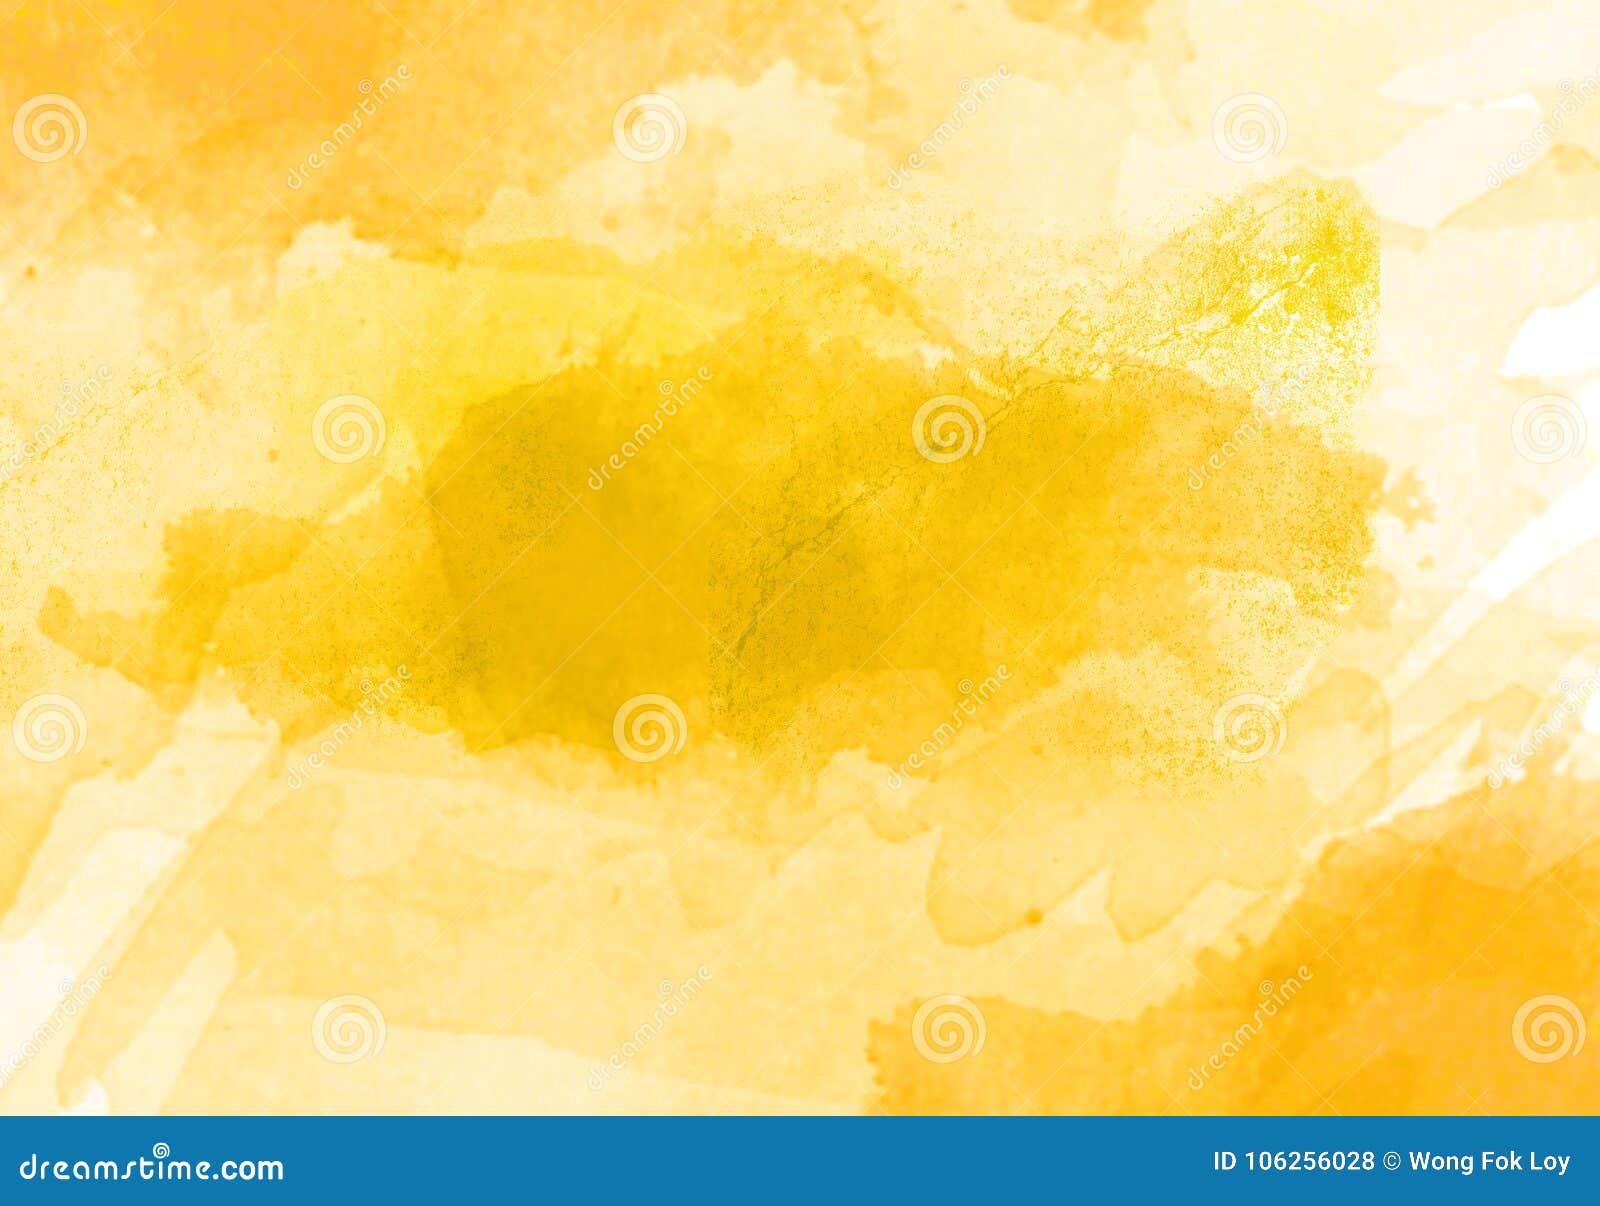 water colour brush strokes  graphic effect background